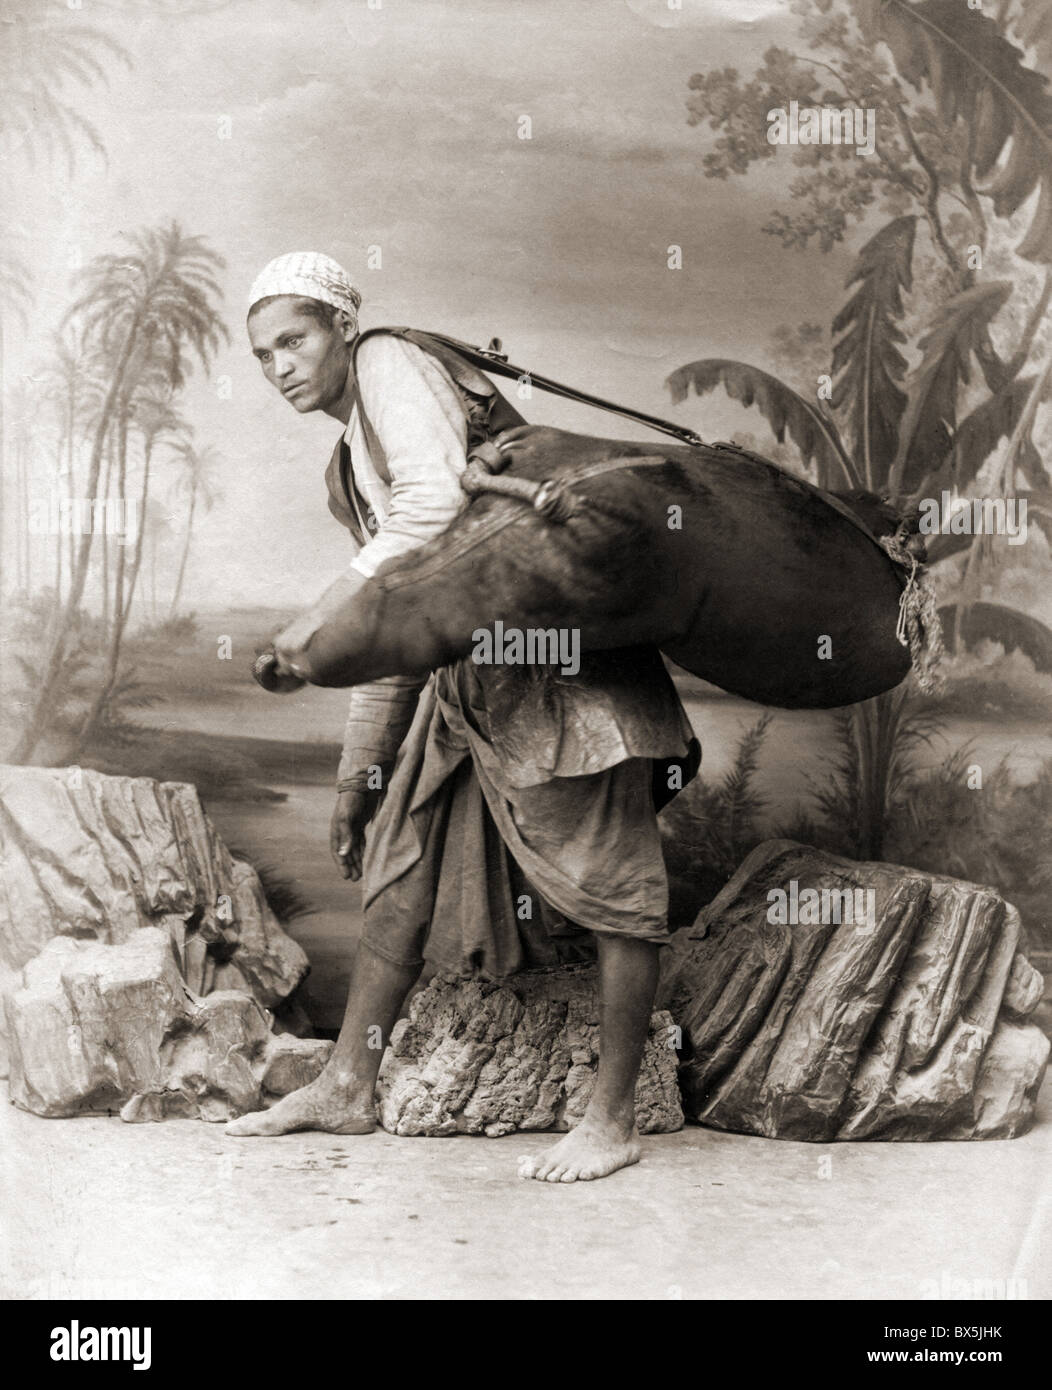 people, men, Africa, man carrying a bag, studio shot by J. P. Sebah, late 19th century, water, oasis, oases, ethnicities, ethnic, ethnology, North African, rocks, historic, historical, carrier, male, Additional-Rights-Clearences-Not Available Stock Photo